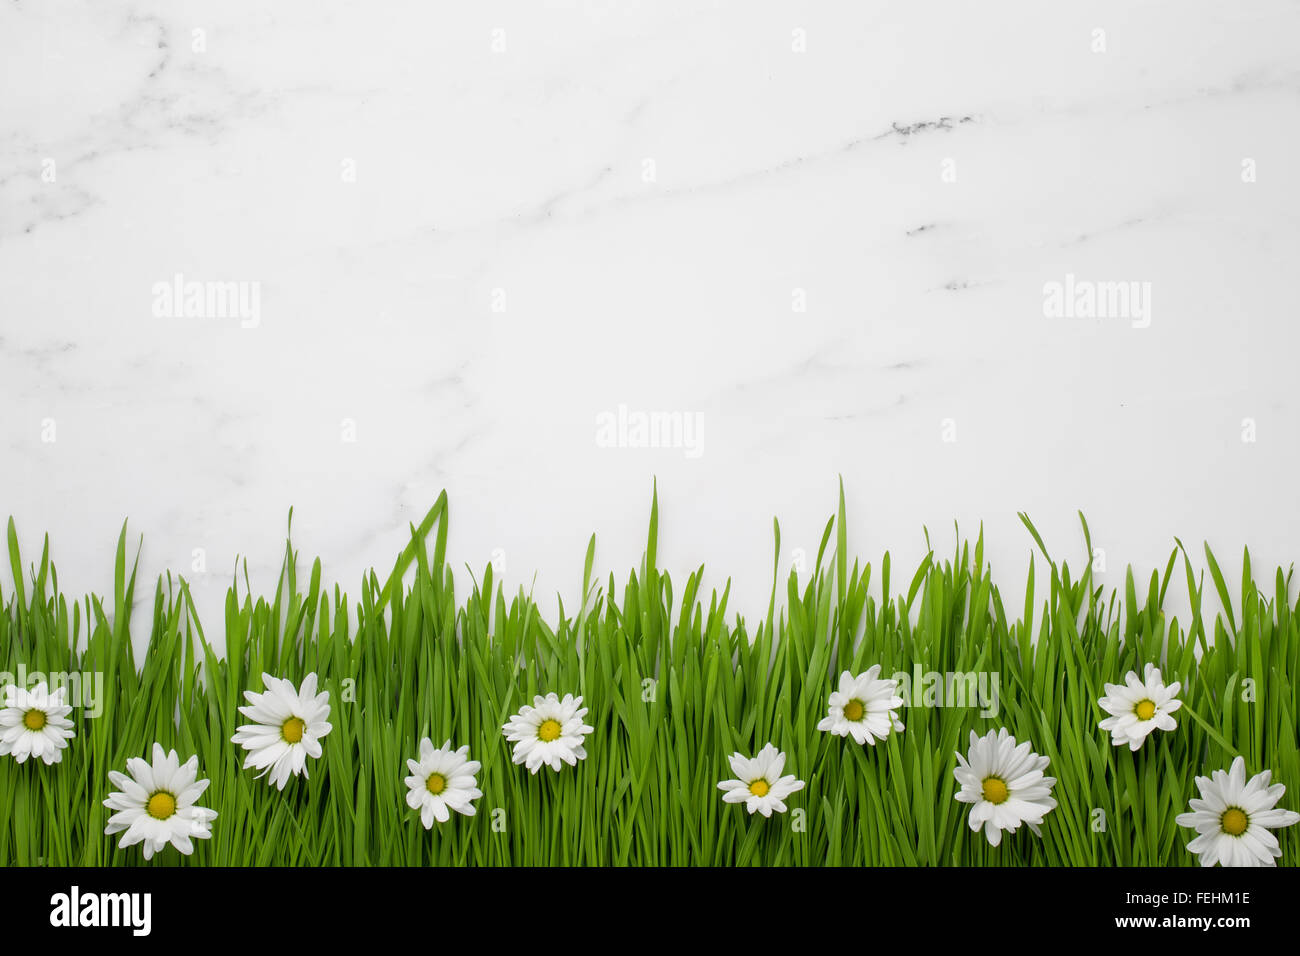 white daisy flowers in green grass on marble background Stock Photo